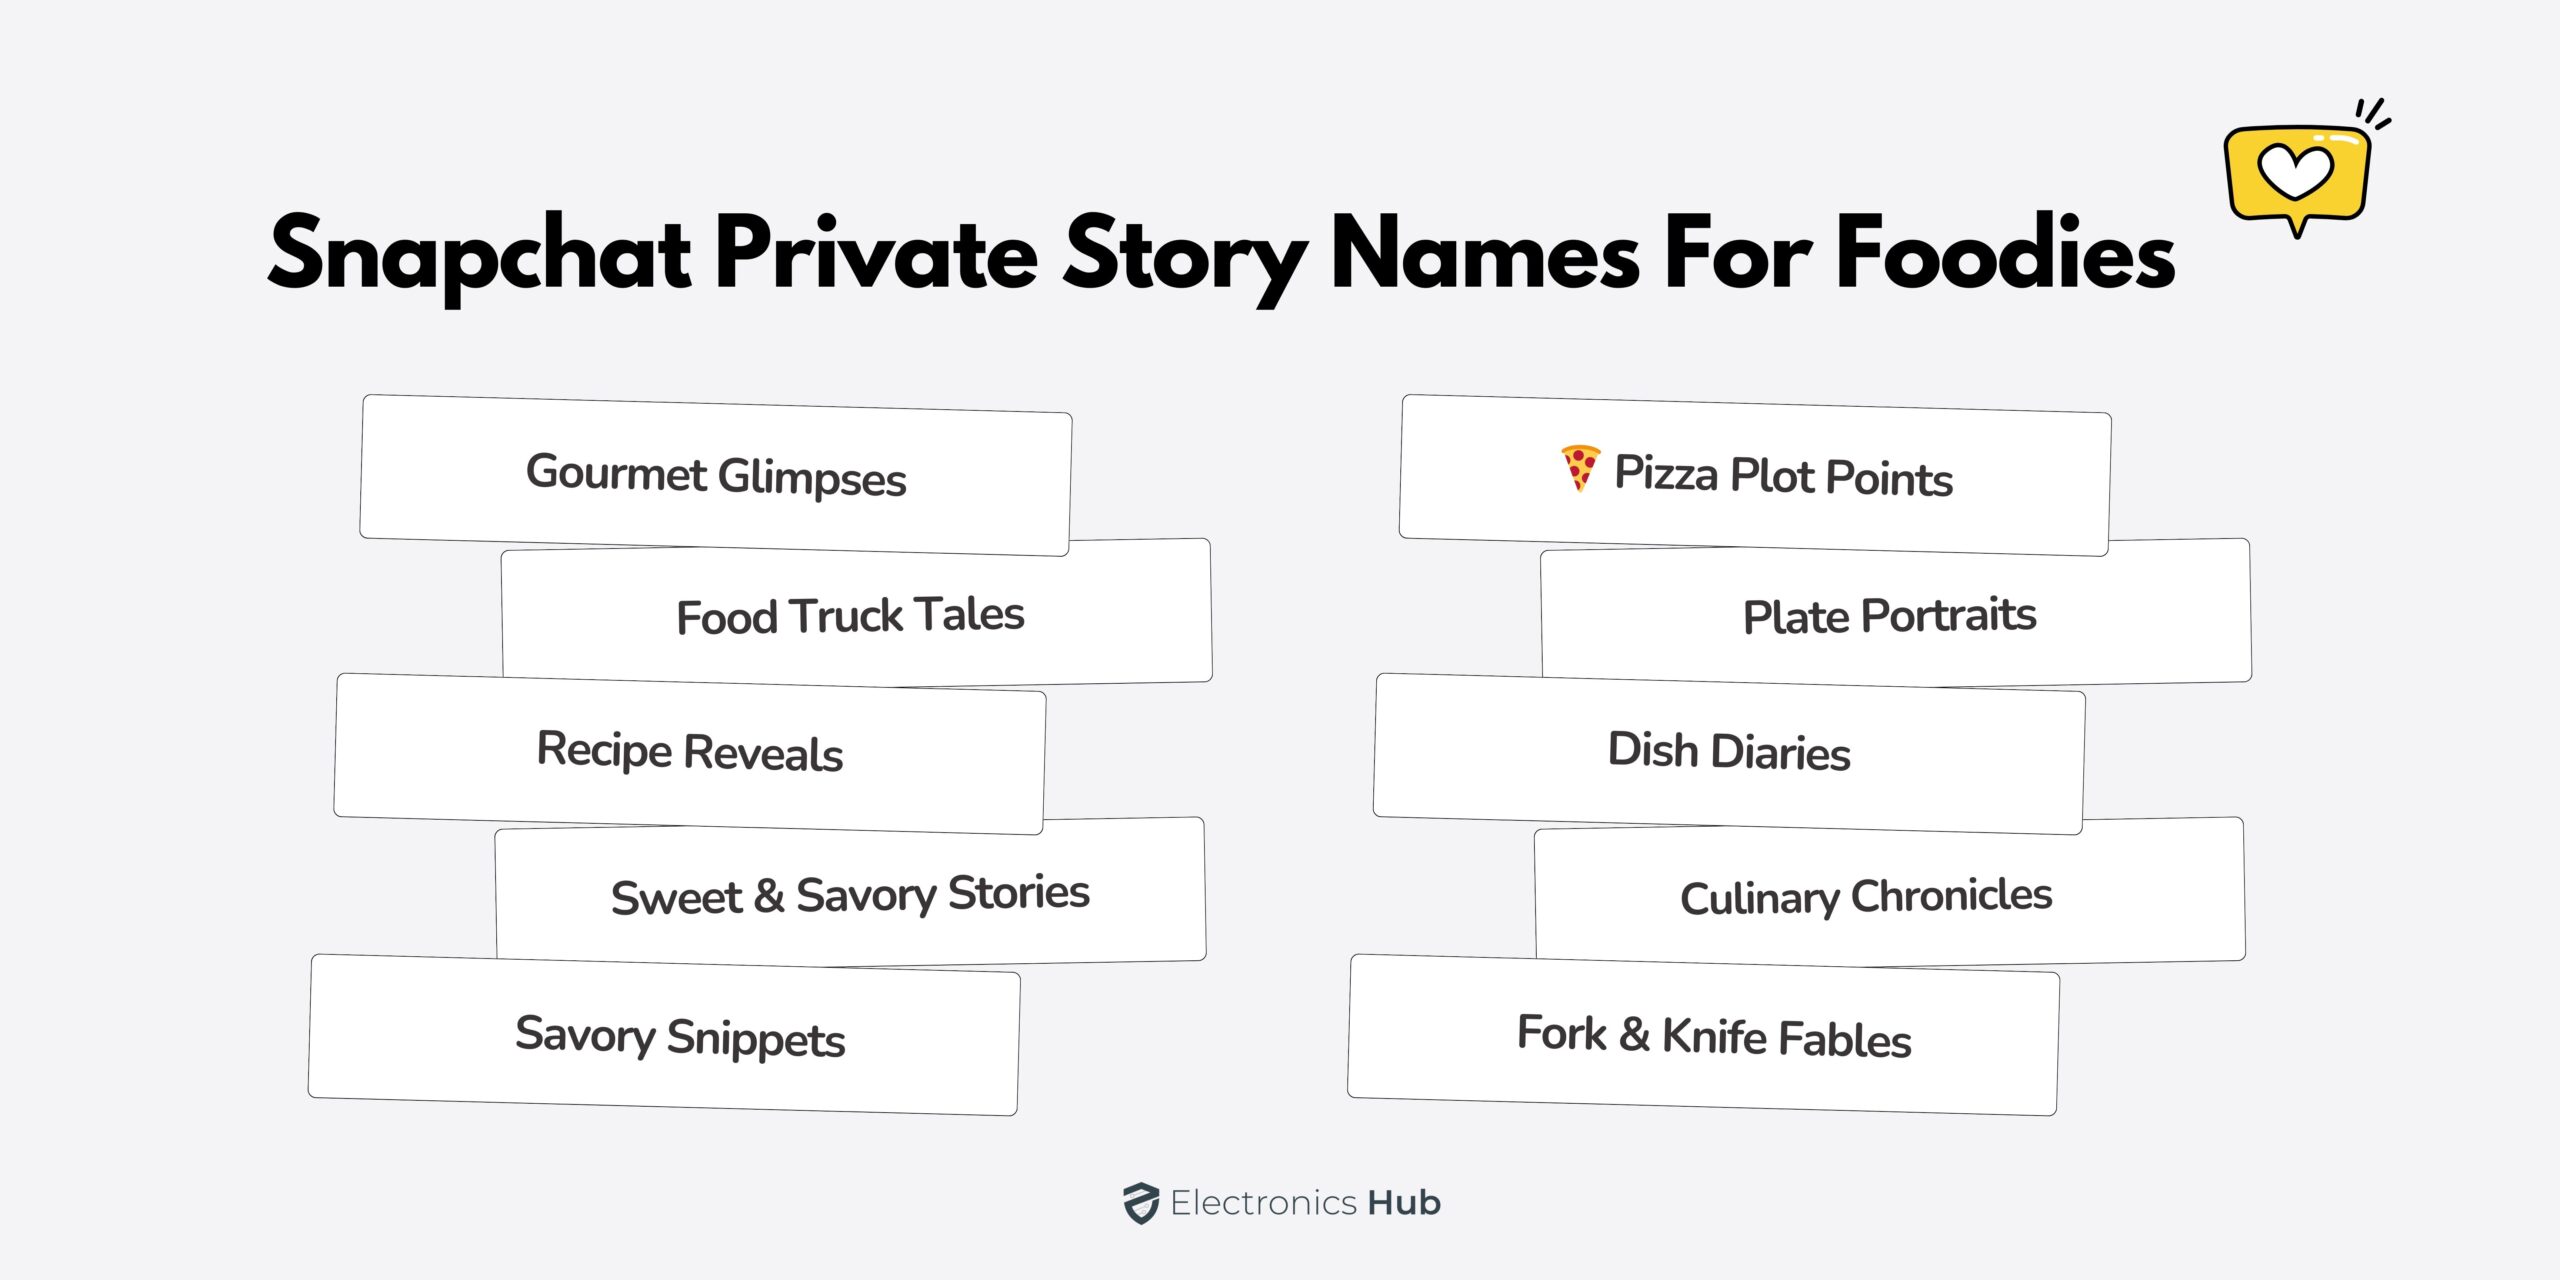 Snapchat Private Story Names for Foodies